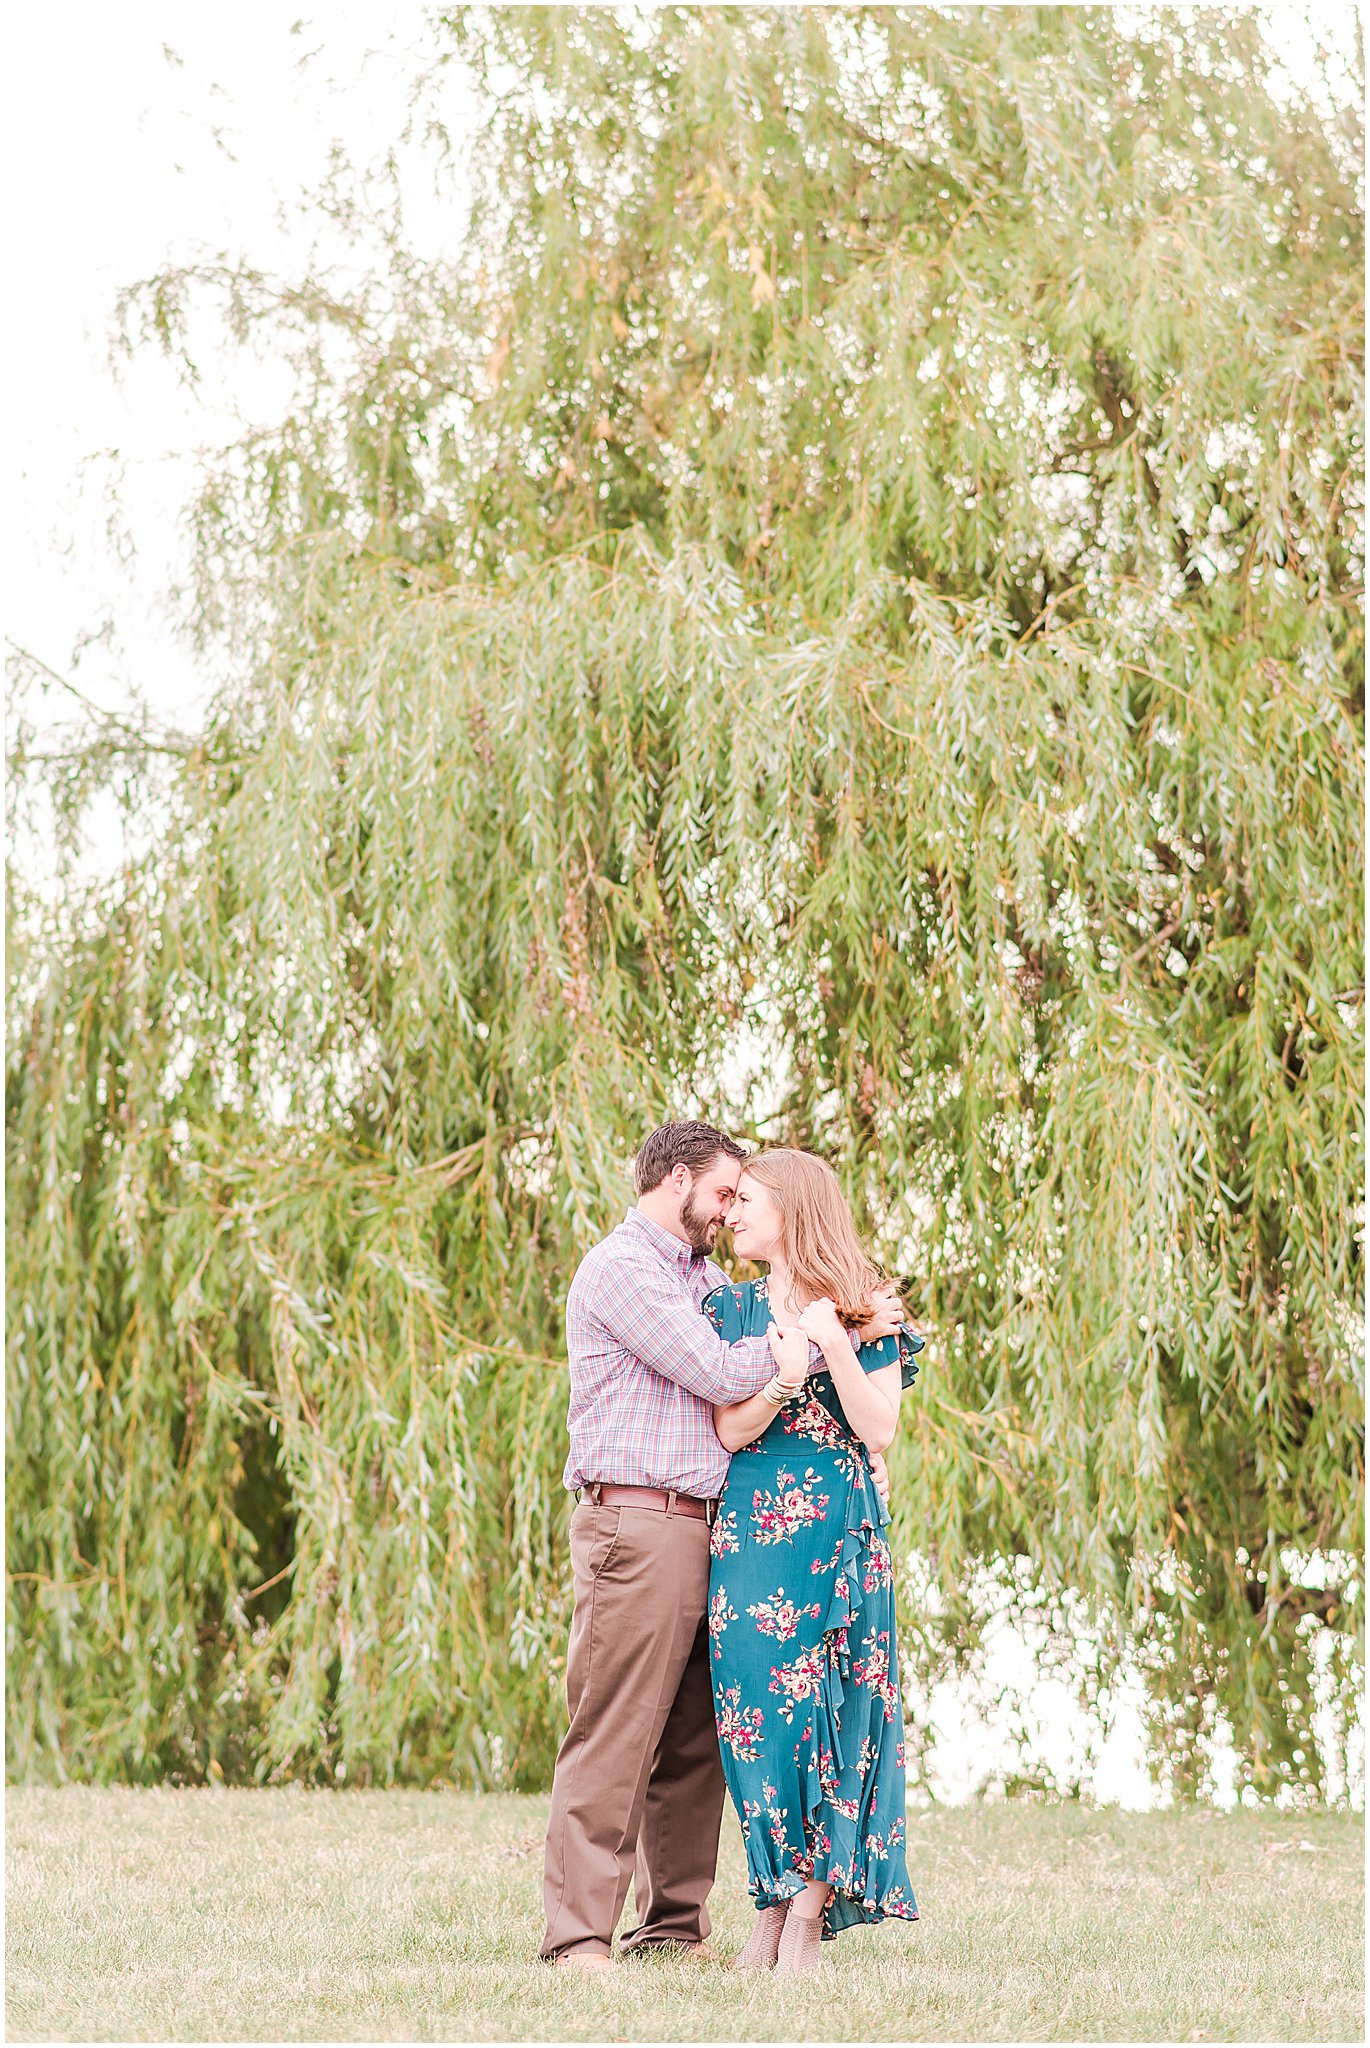 Bride and groom nuzzling in front of willow tree during Coxhall Gardens engagement session